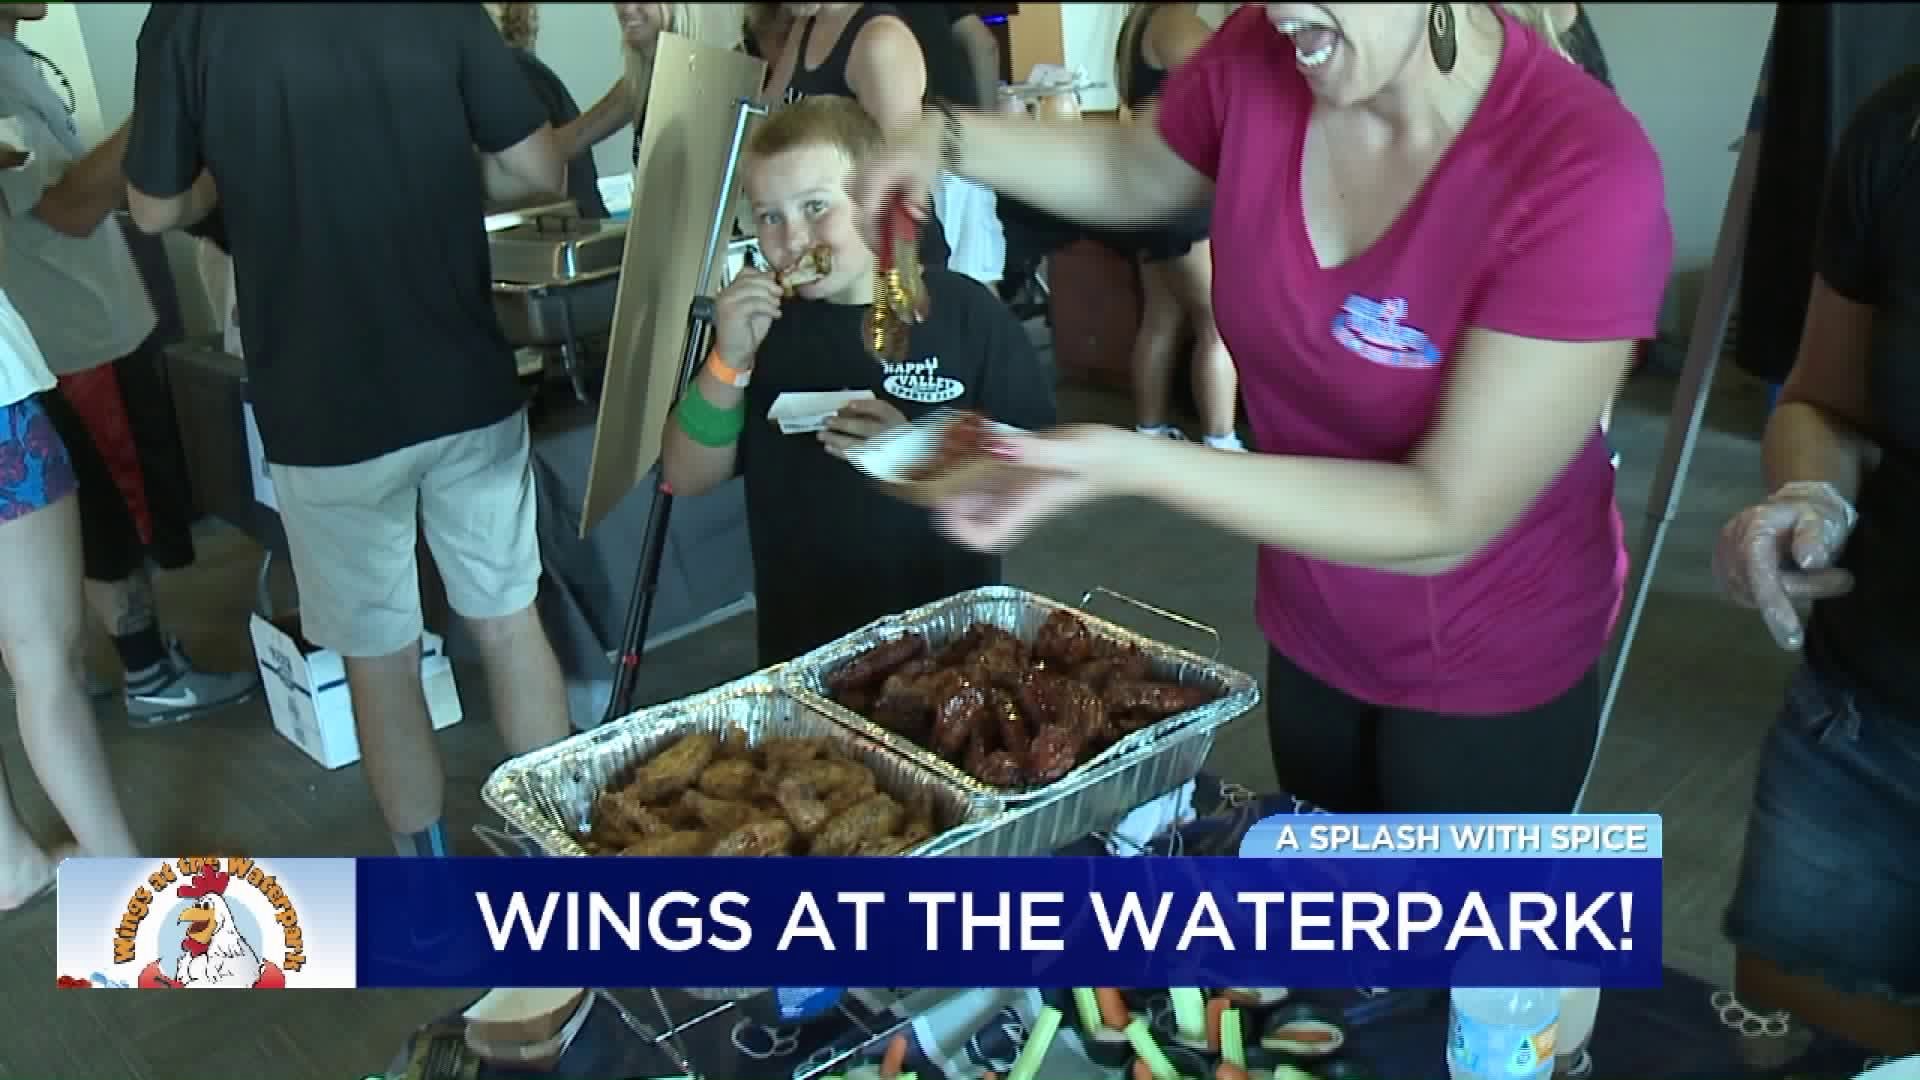 A Splash With Spice: Wings at the Waterpark